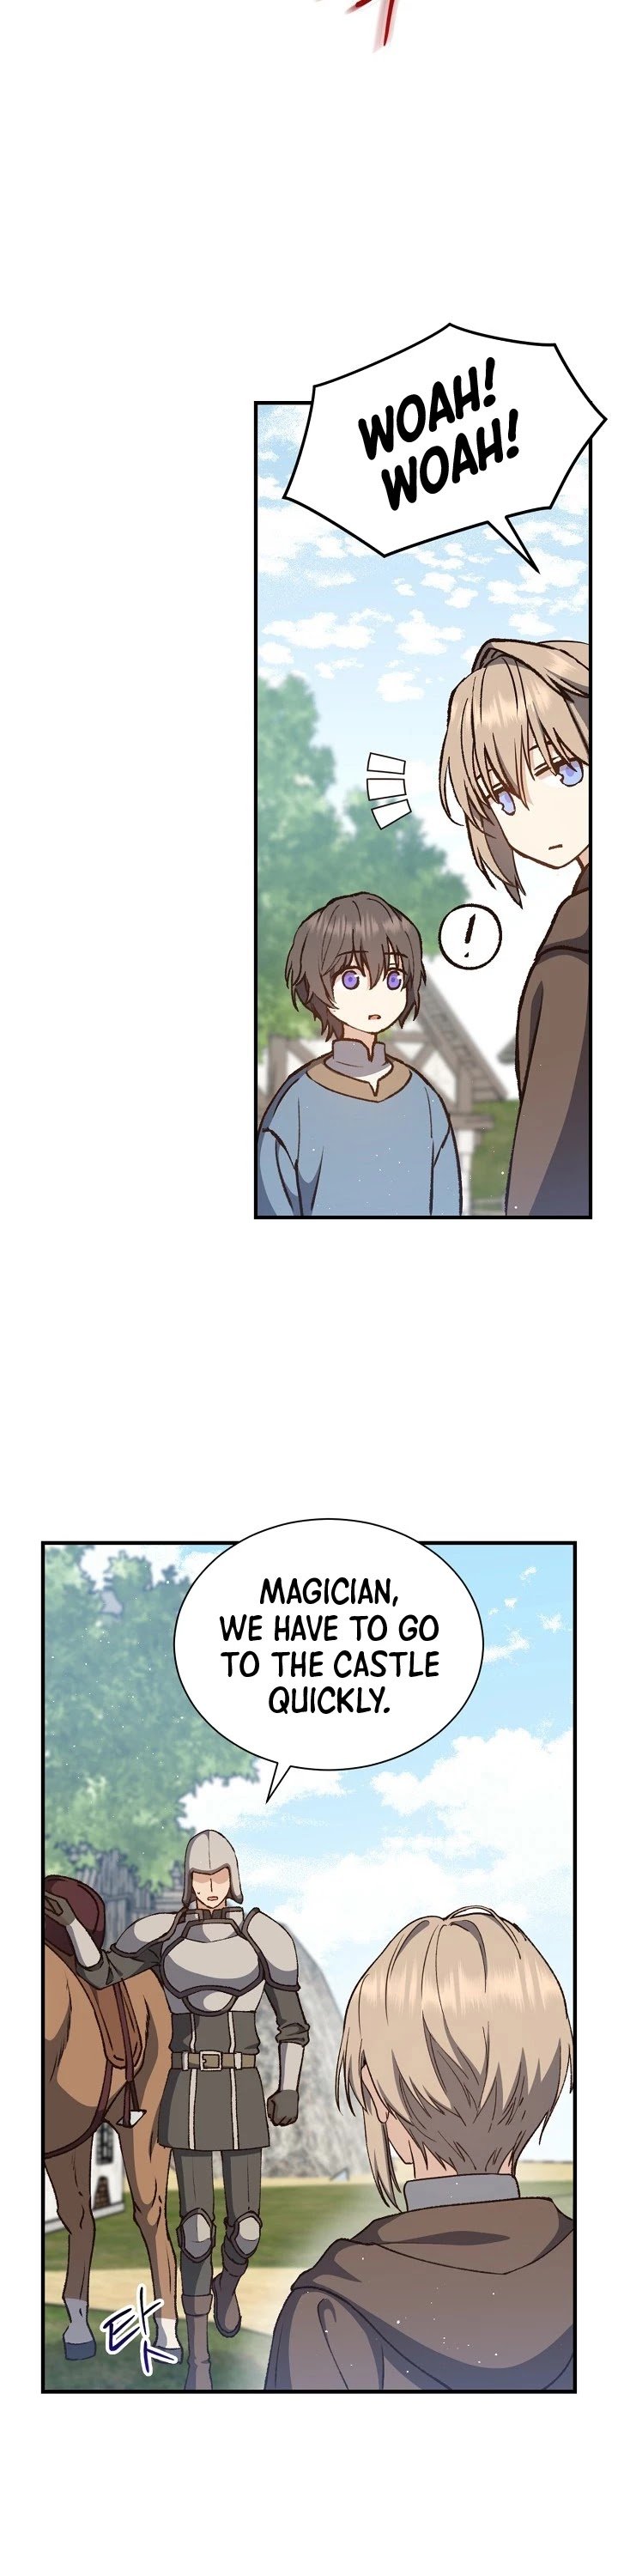 Return of the 8th class Magician chapter 9